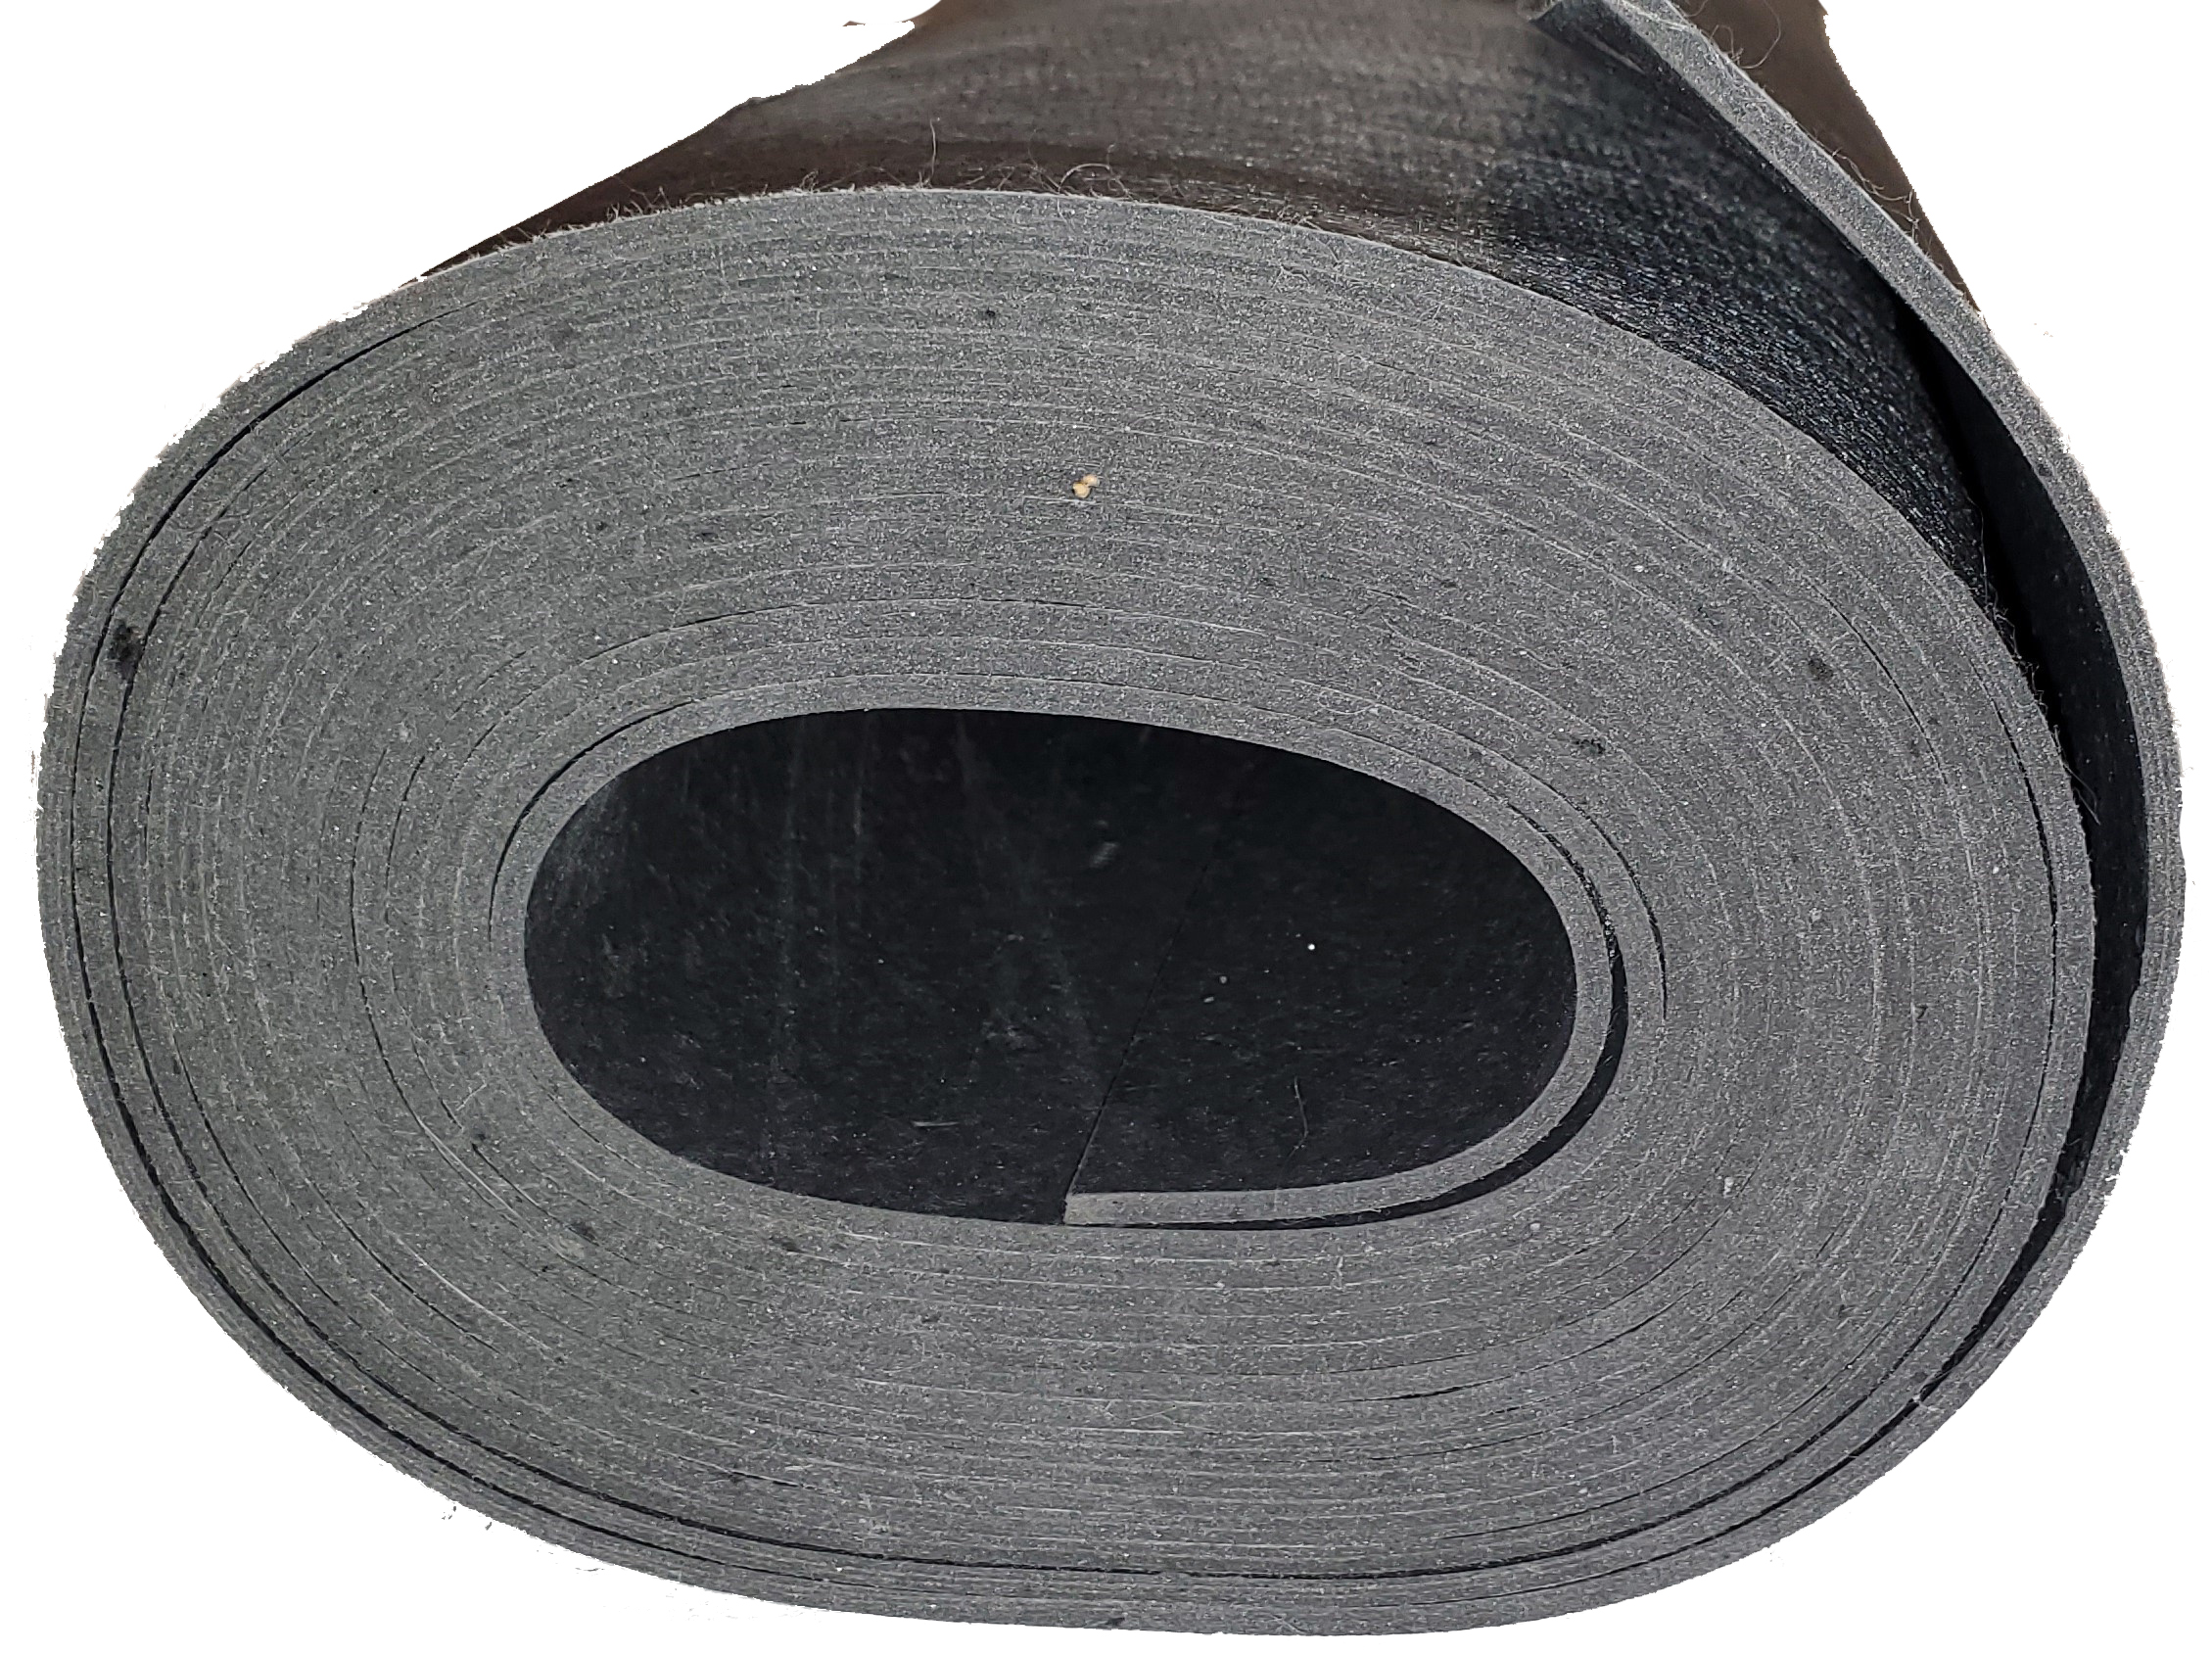 MLV + Mass Loaded Vinyl with reinforced backing - 54.5 s.ft. Roll